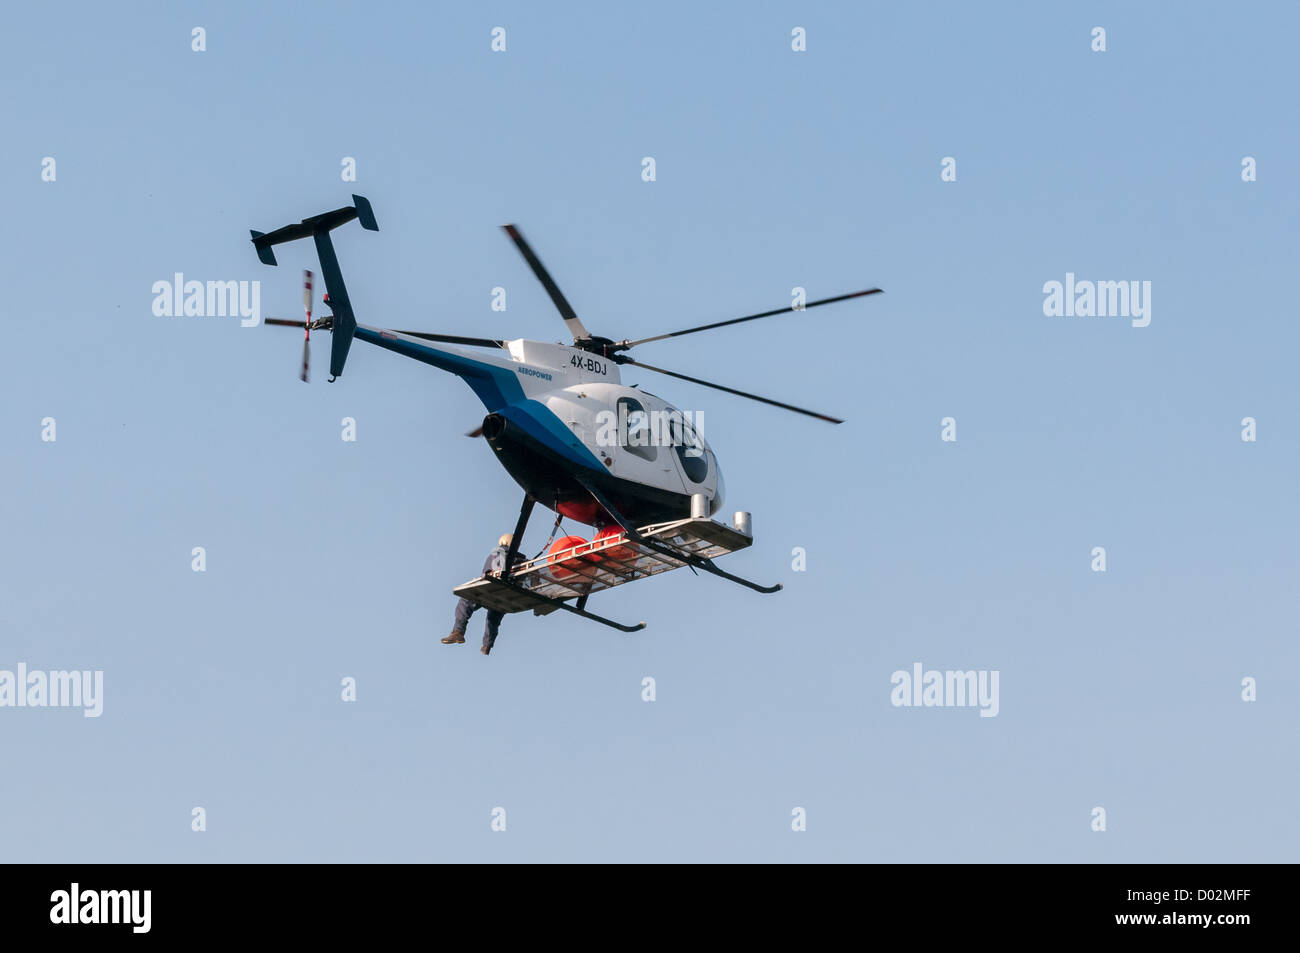 Hughes MD 500E Civilian Helicopter. Photographed in Israel Stock Photo